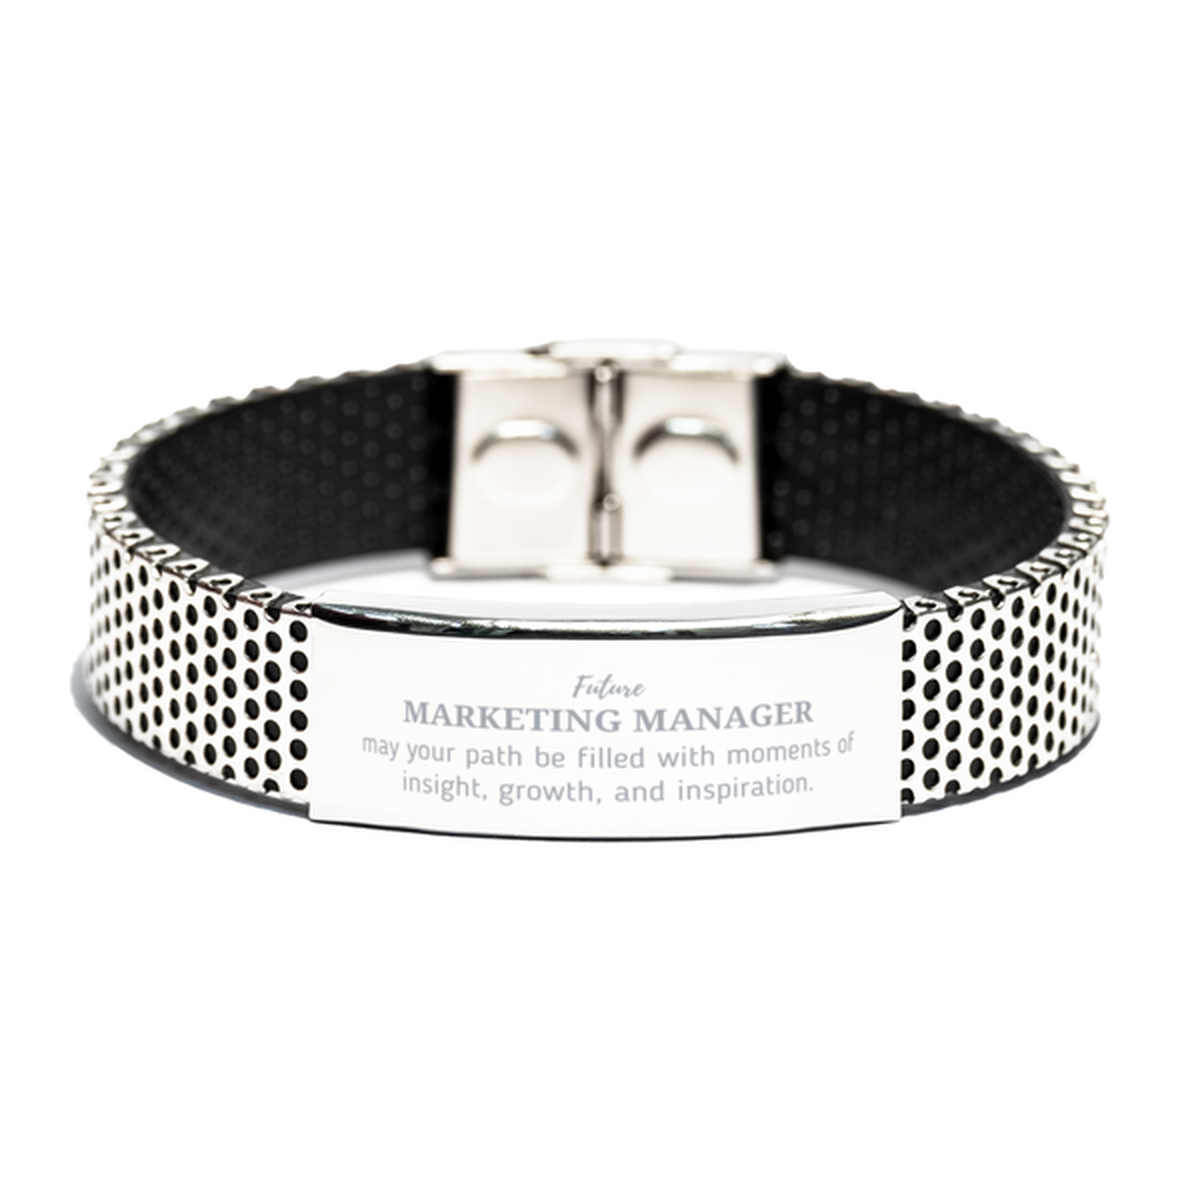 Future Marketing Manager Gifts, May your path be filled with moments of insight, Graduation Gifts for New Marketing Manager, Christmas Unique Stainless Steel Bracelet For Men, Women, Friends